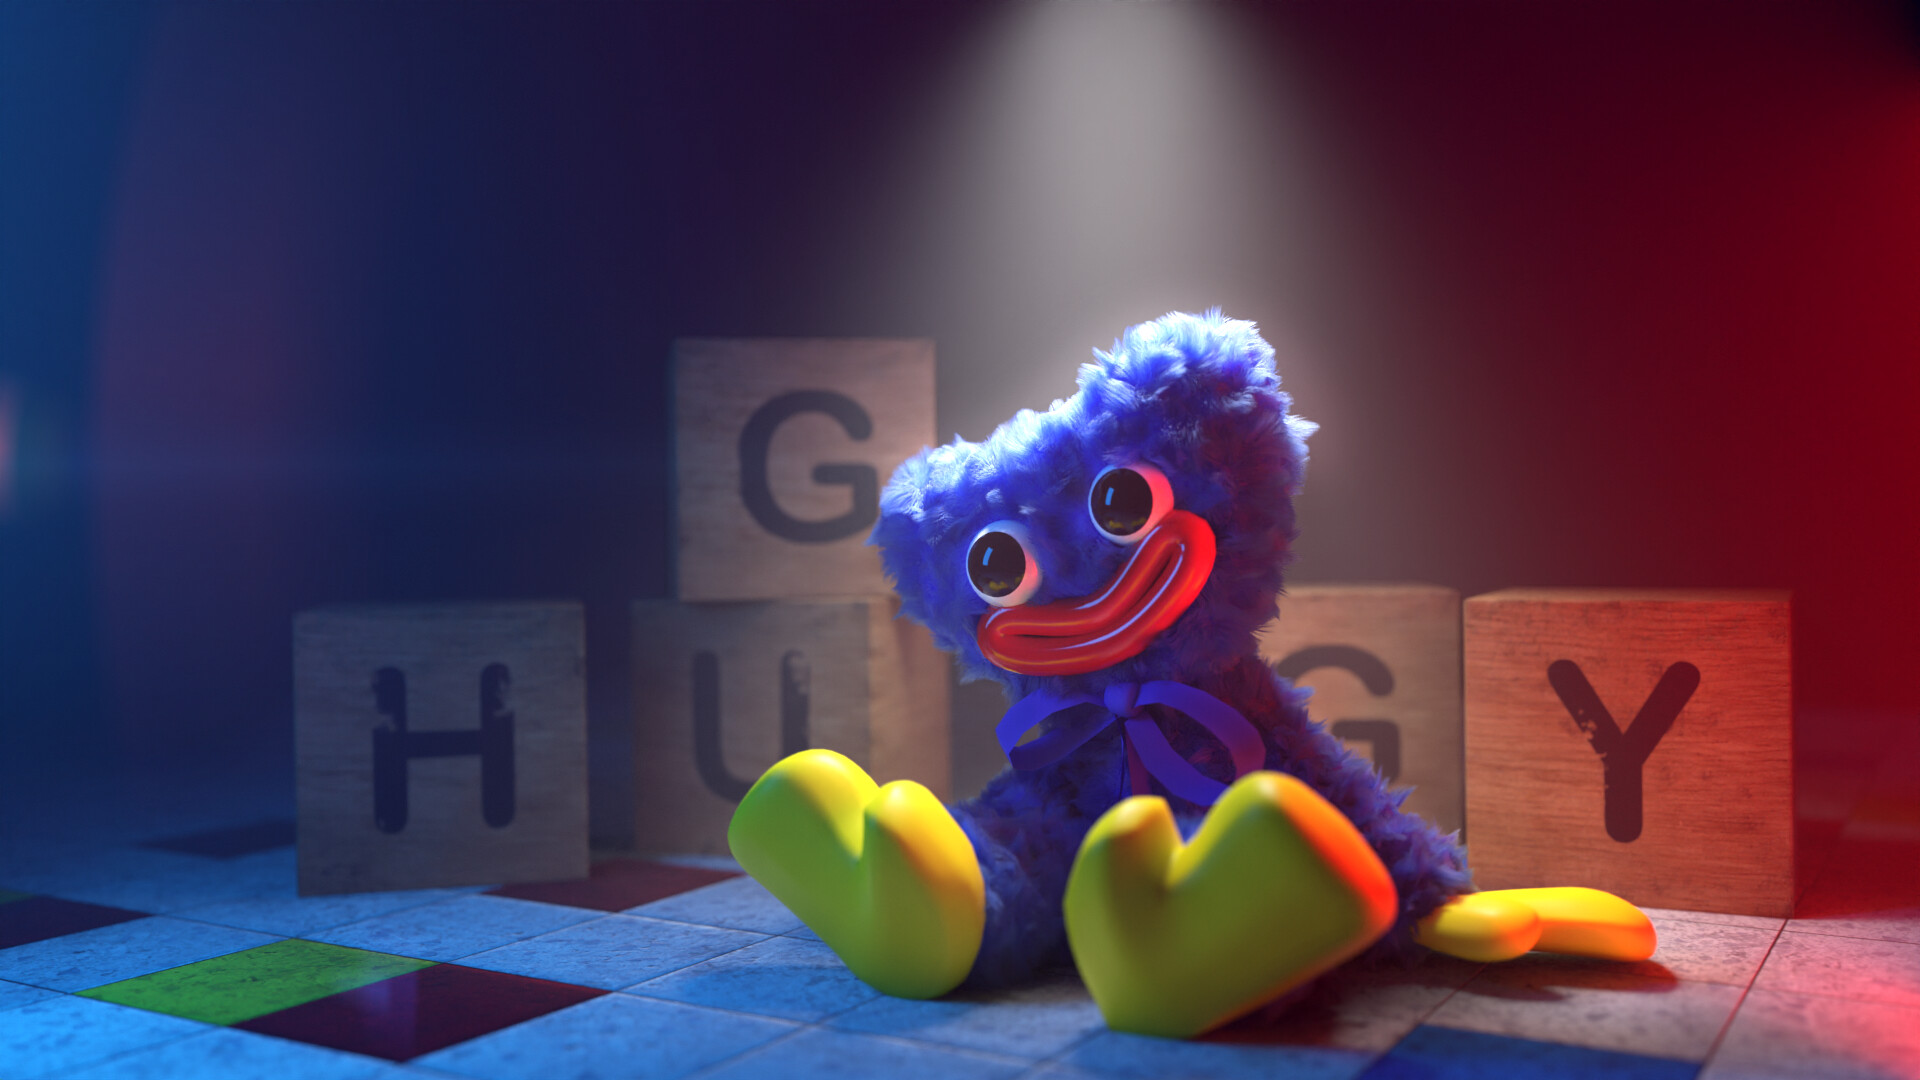 Poppy Playtime: A toy created by Playtime Co., A huggable, friendly mascot, The highest-selling toy. 1920x1080 Full HD Background.